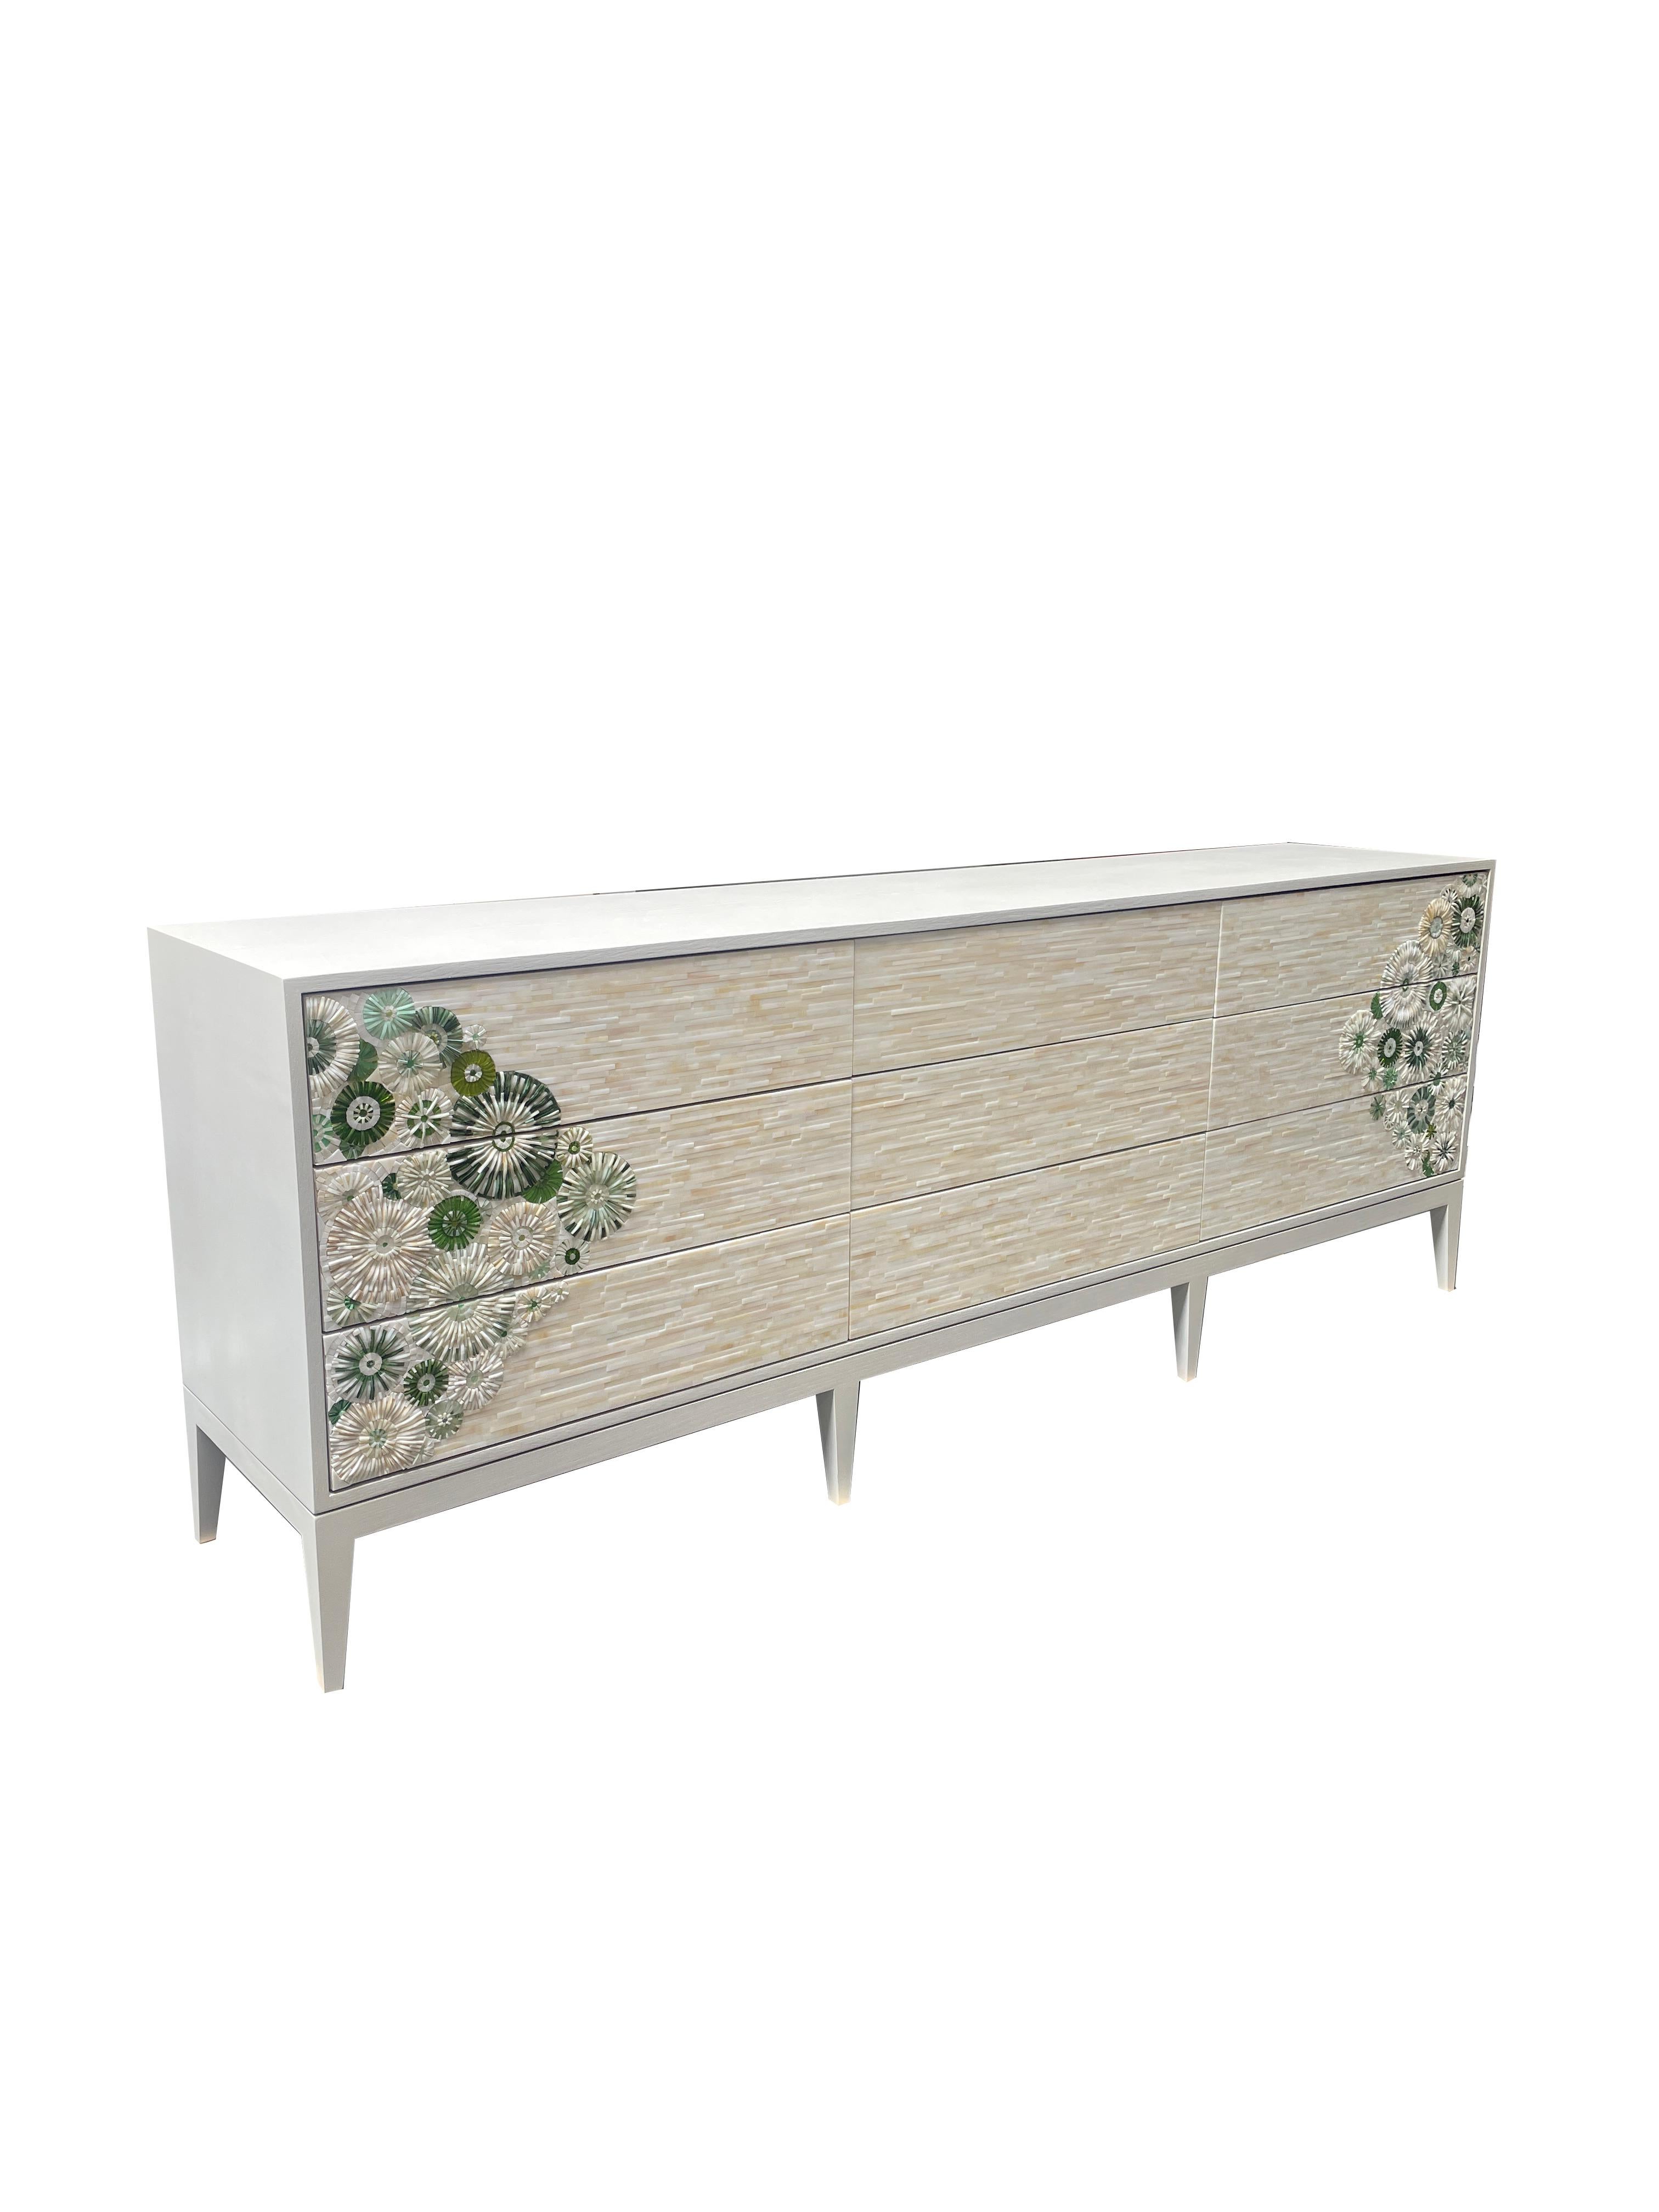 The Modern Milano Chest of 9 Drawers by Ercole home has a 9 drawer front, with a White Wash finish on oak. The touch-latch drawer's feature fronts in hand-cut glass mosaic, in shades of green and ivory, and fields of Ivory mosaic stripe. 

Made in